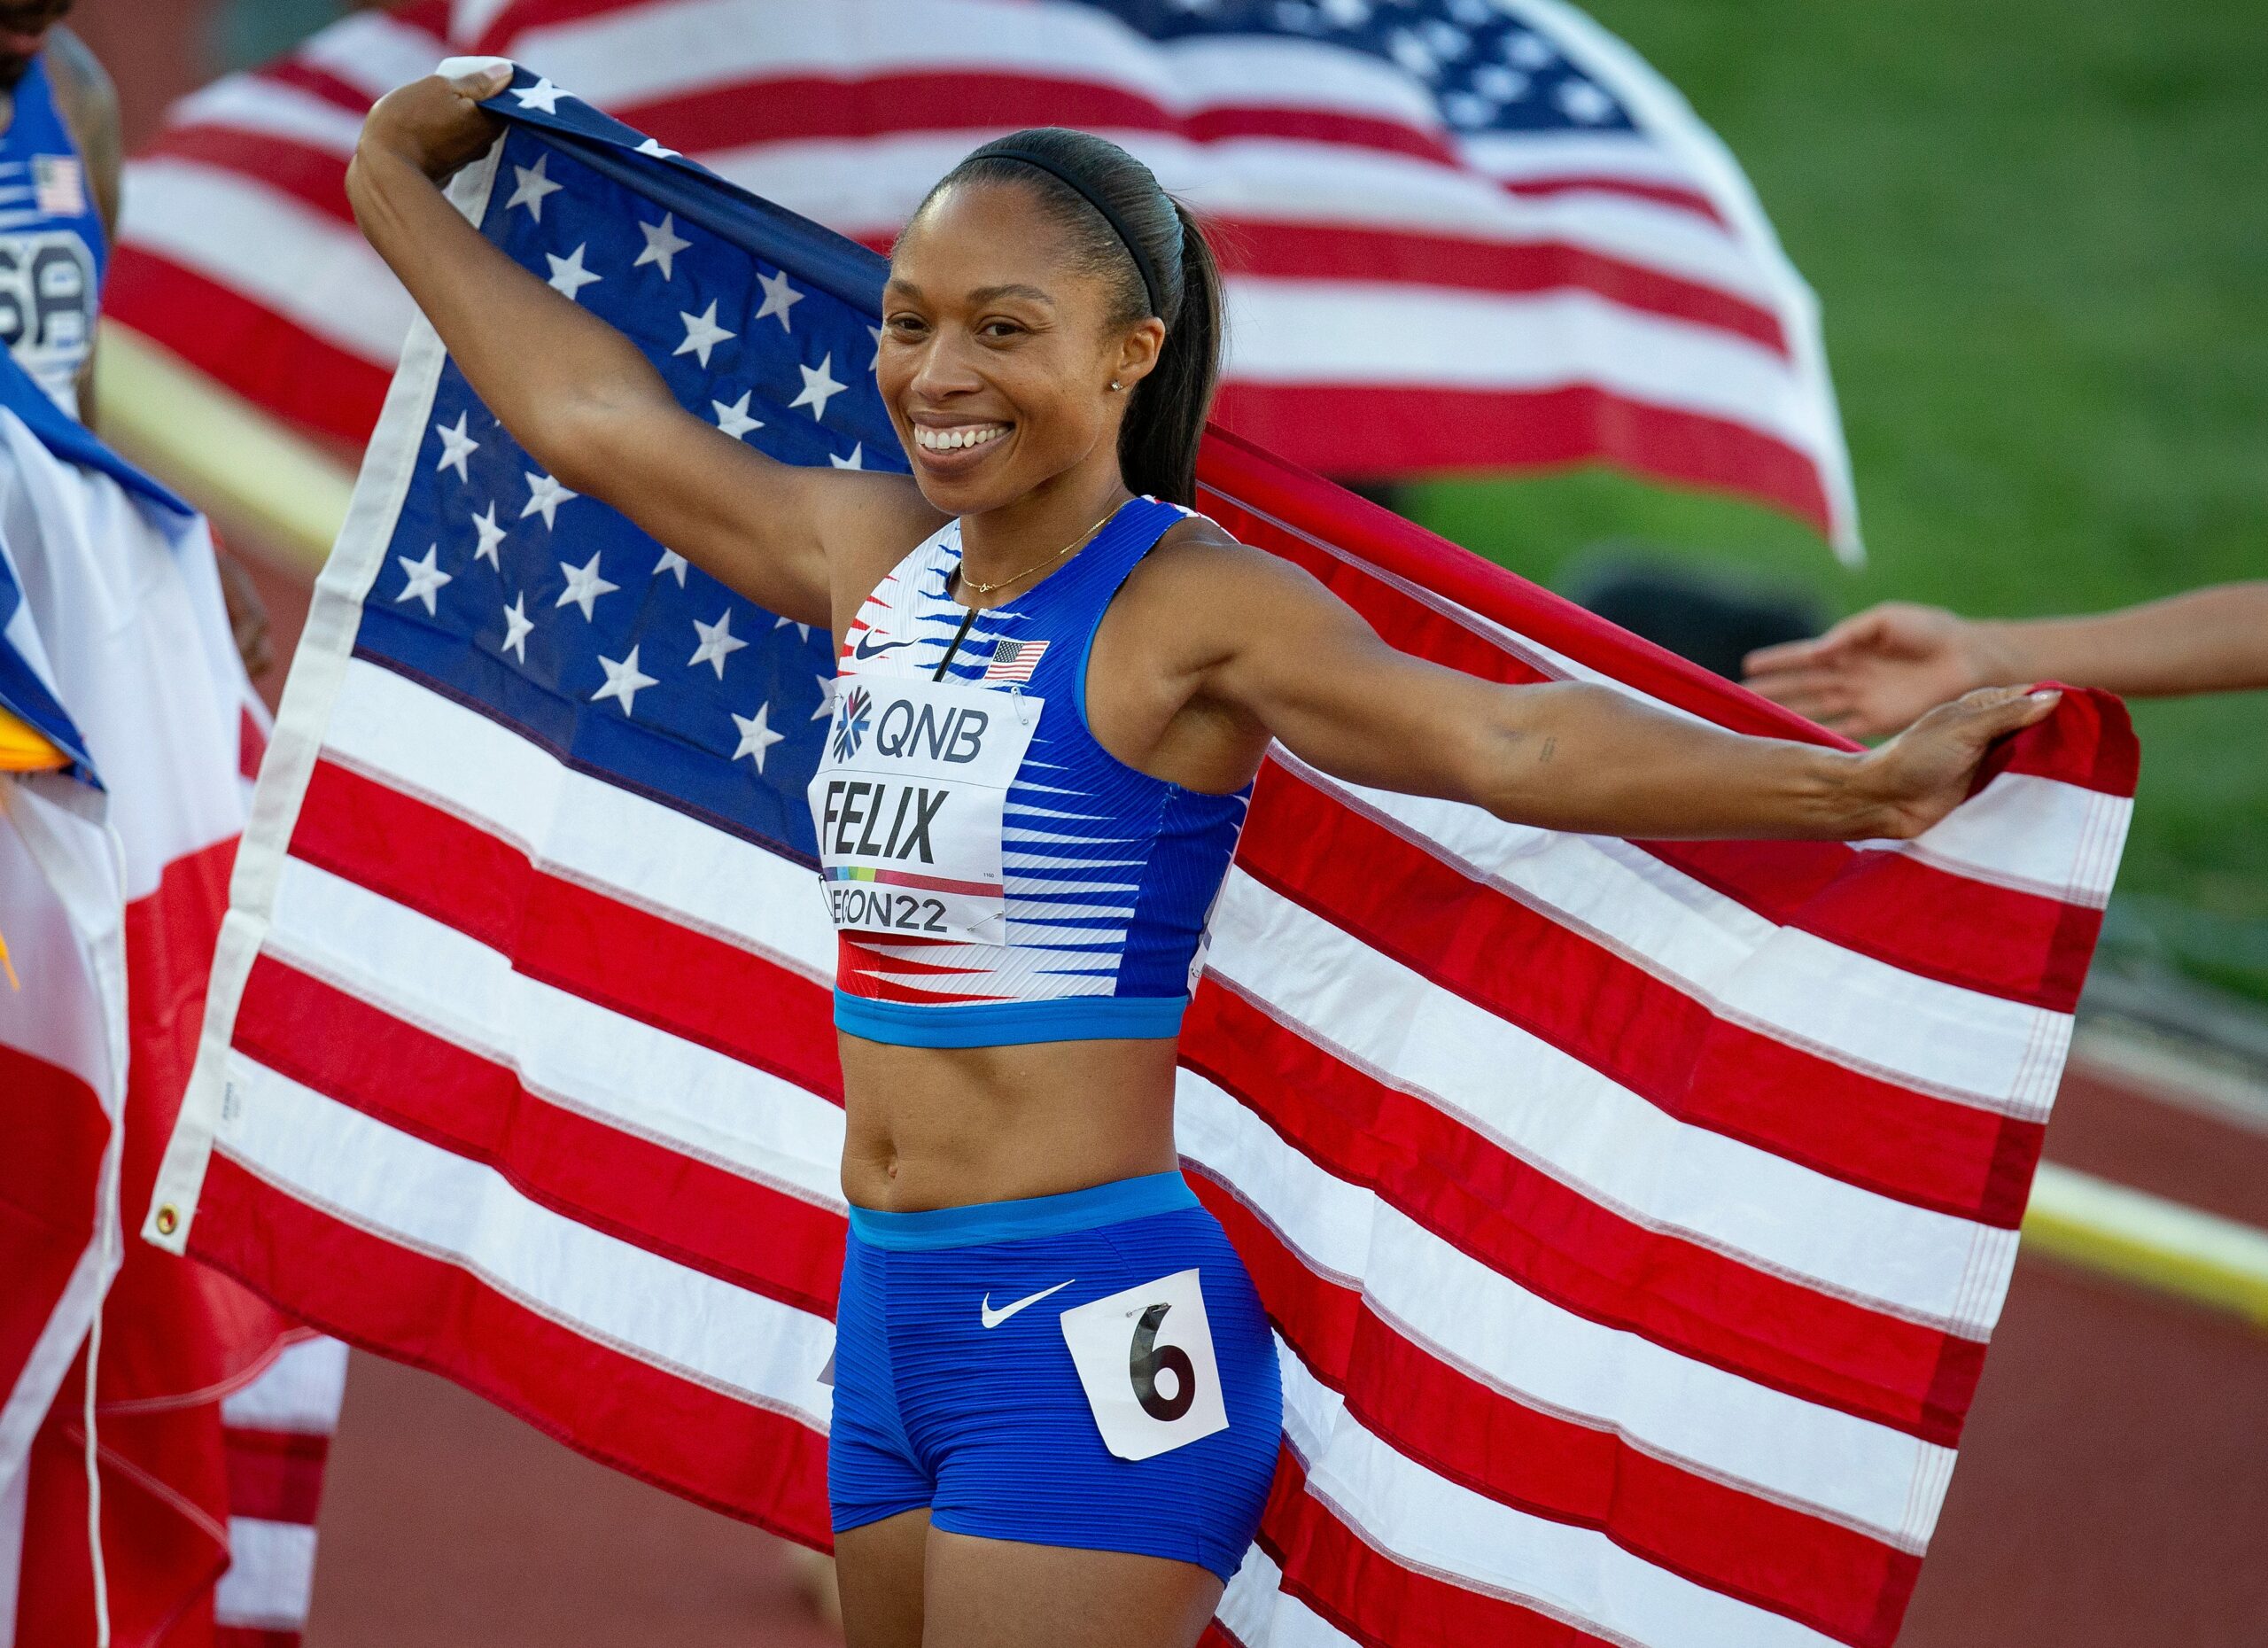 USC honors Allyson Felix, most-decorated track and field athlete in Olympic history